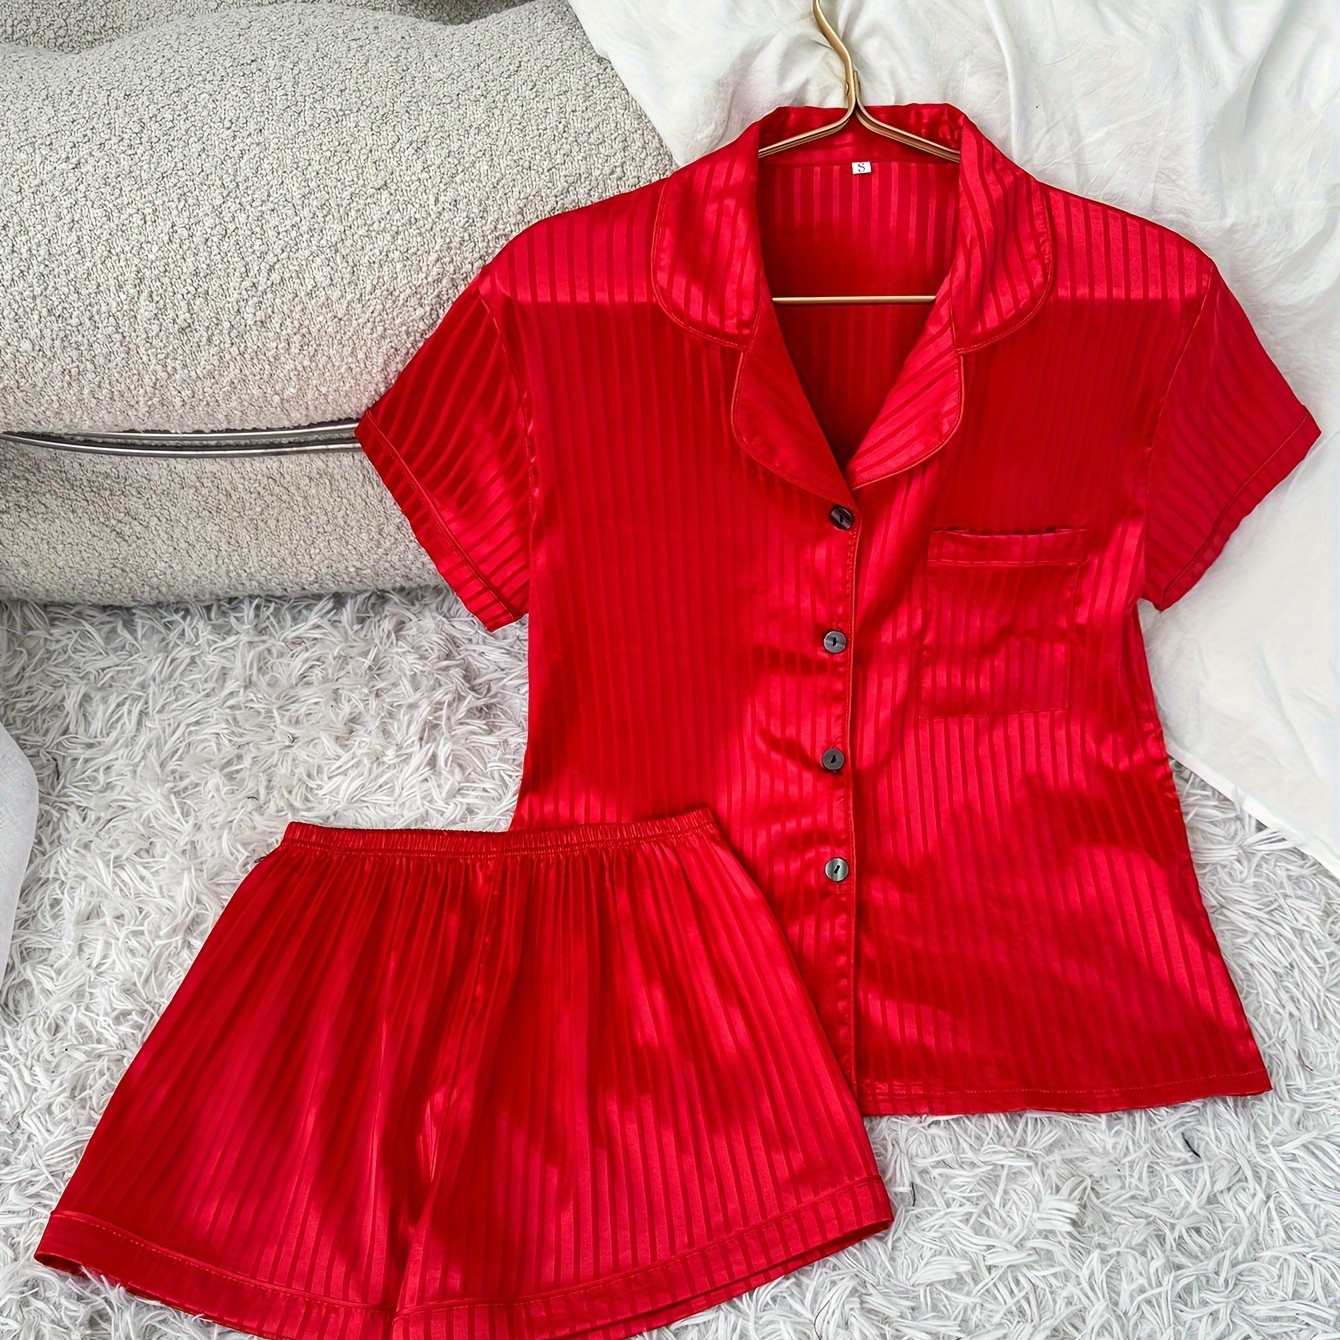 

Women's Striped Satin Casual Pajama Set, Short Sleeve Buttons Lapel Top & Shorts, Comfortable Relaxed Fit